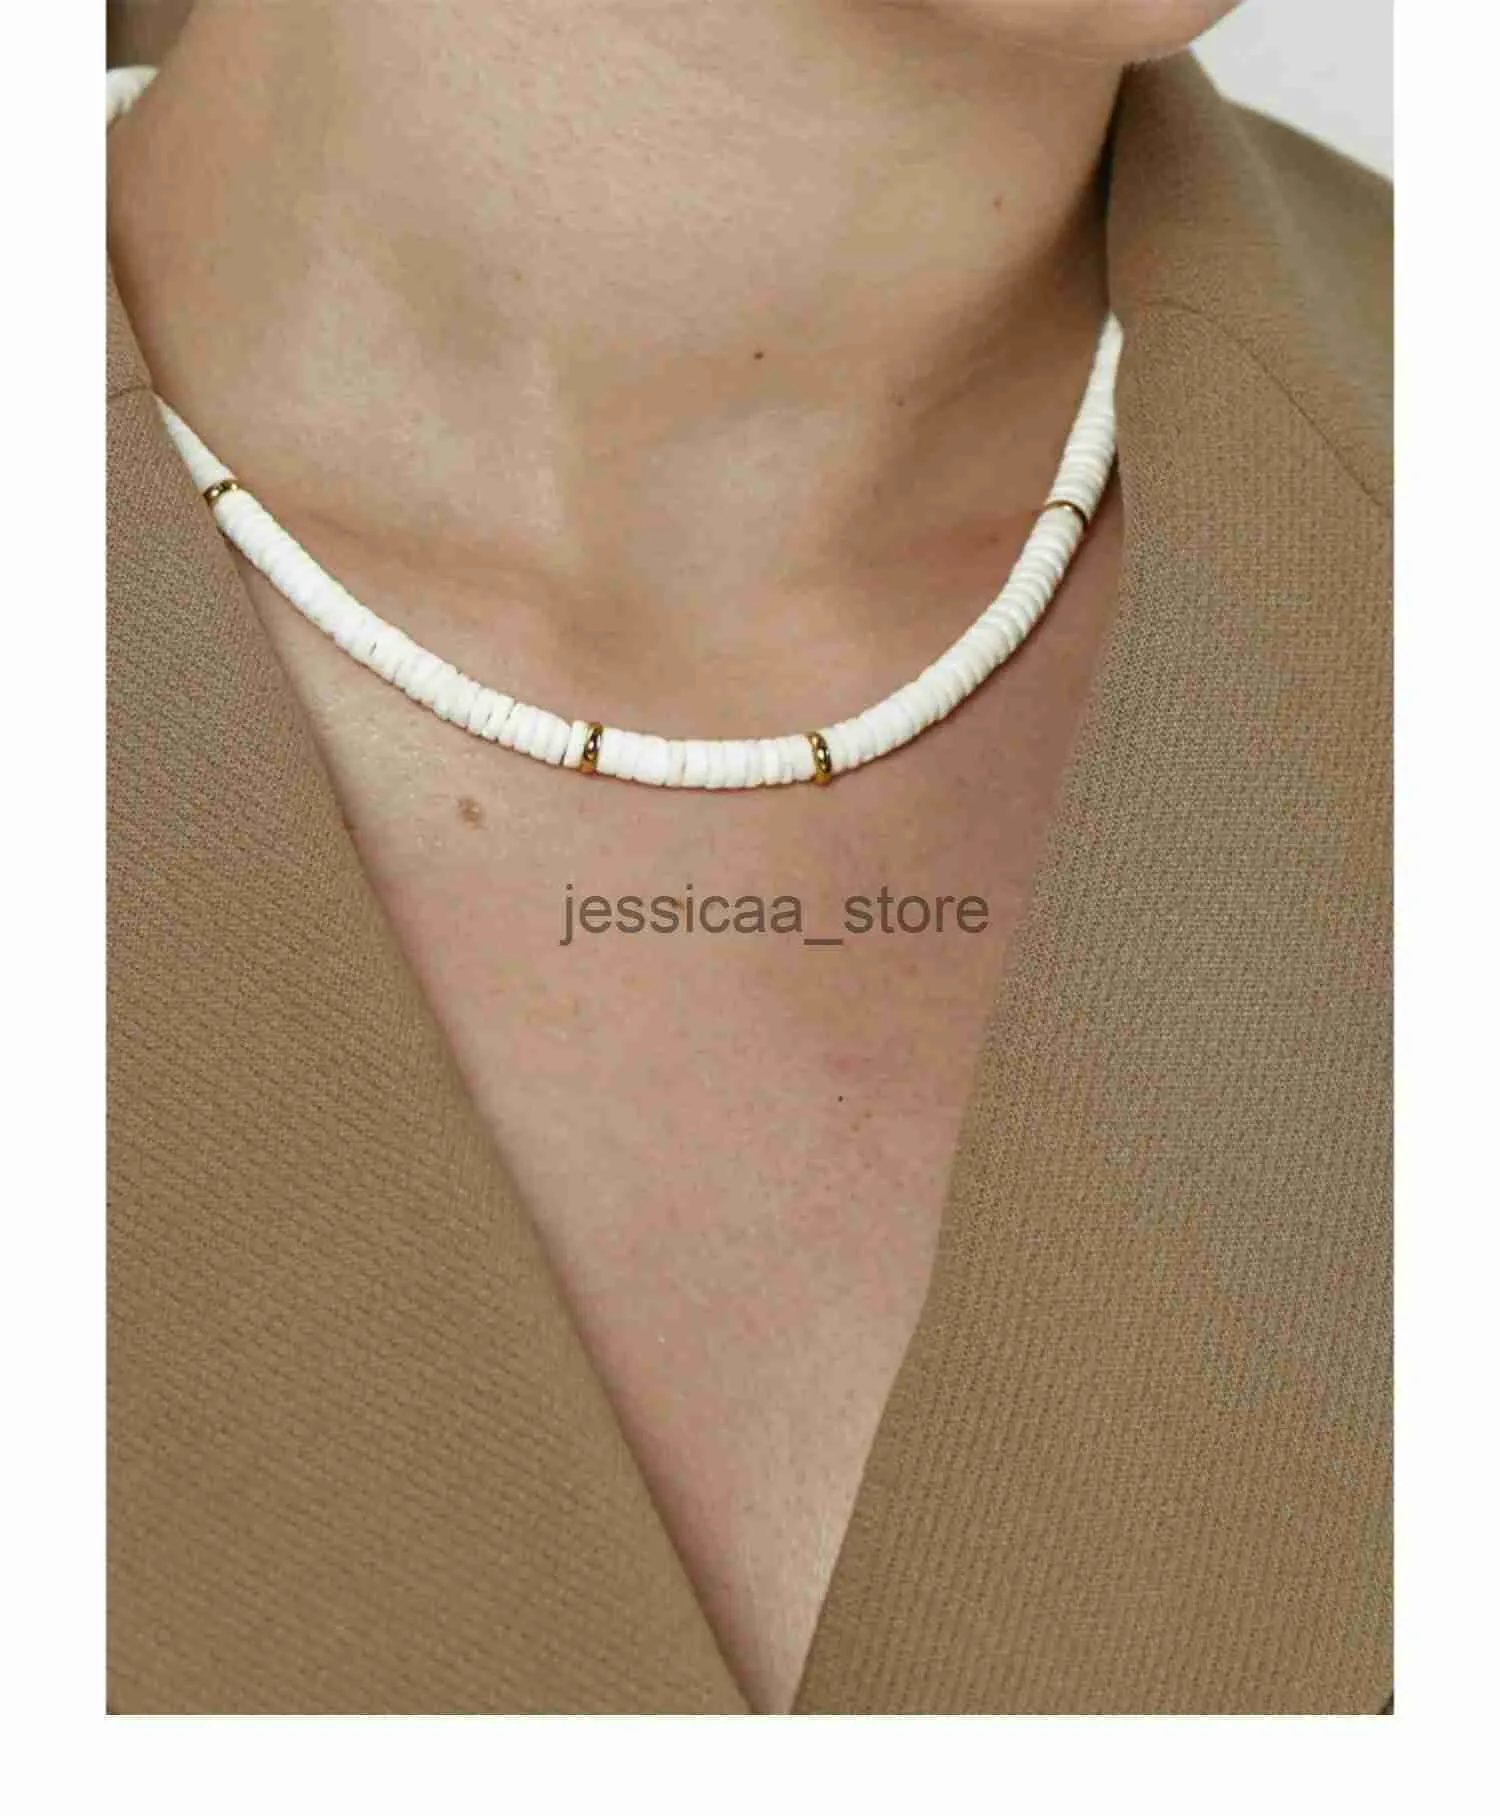 FASACCO Surfer Necklace for Men Puka Shell Necklace Men Sea Shell Necklace  Beach Necklace Pookah Shells Choker Necklace 14 Inch | Amazon.com